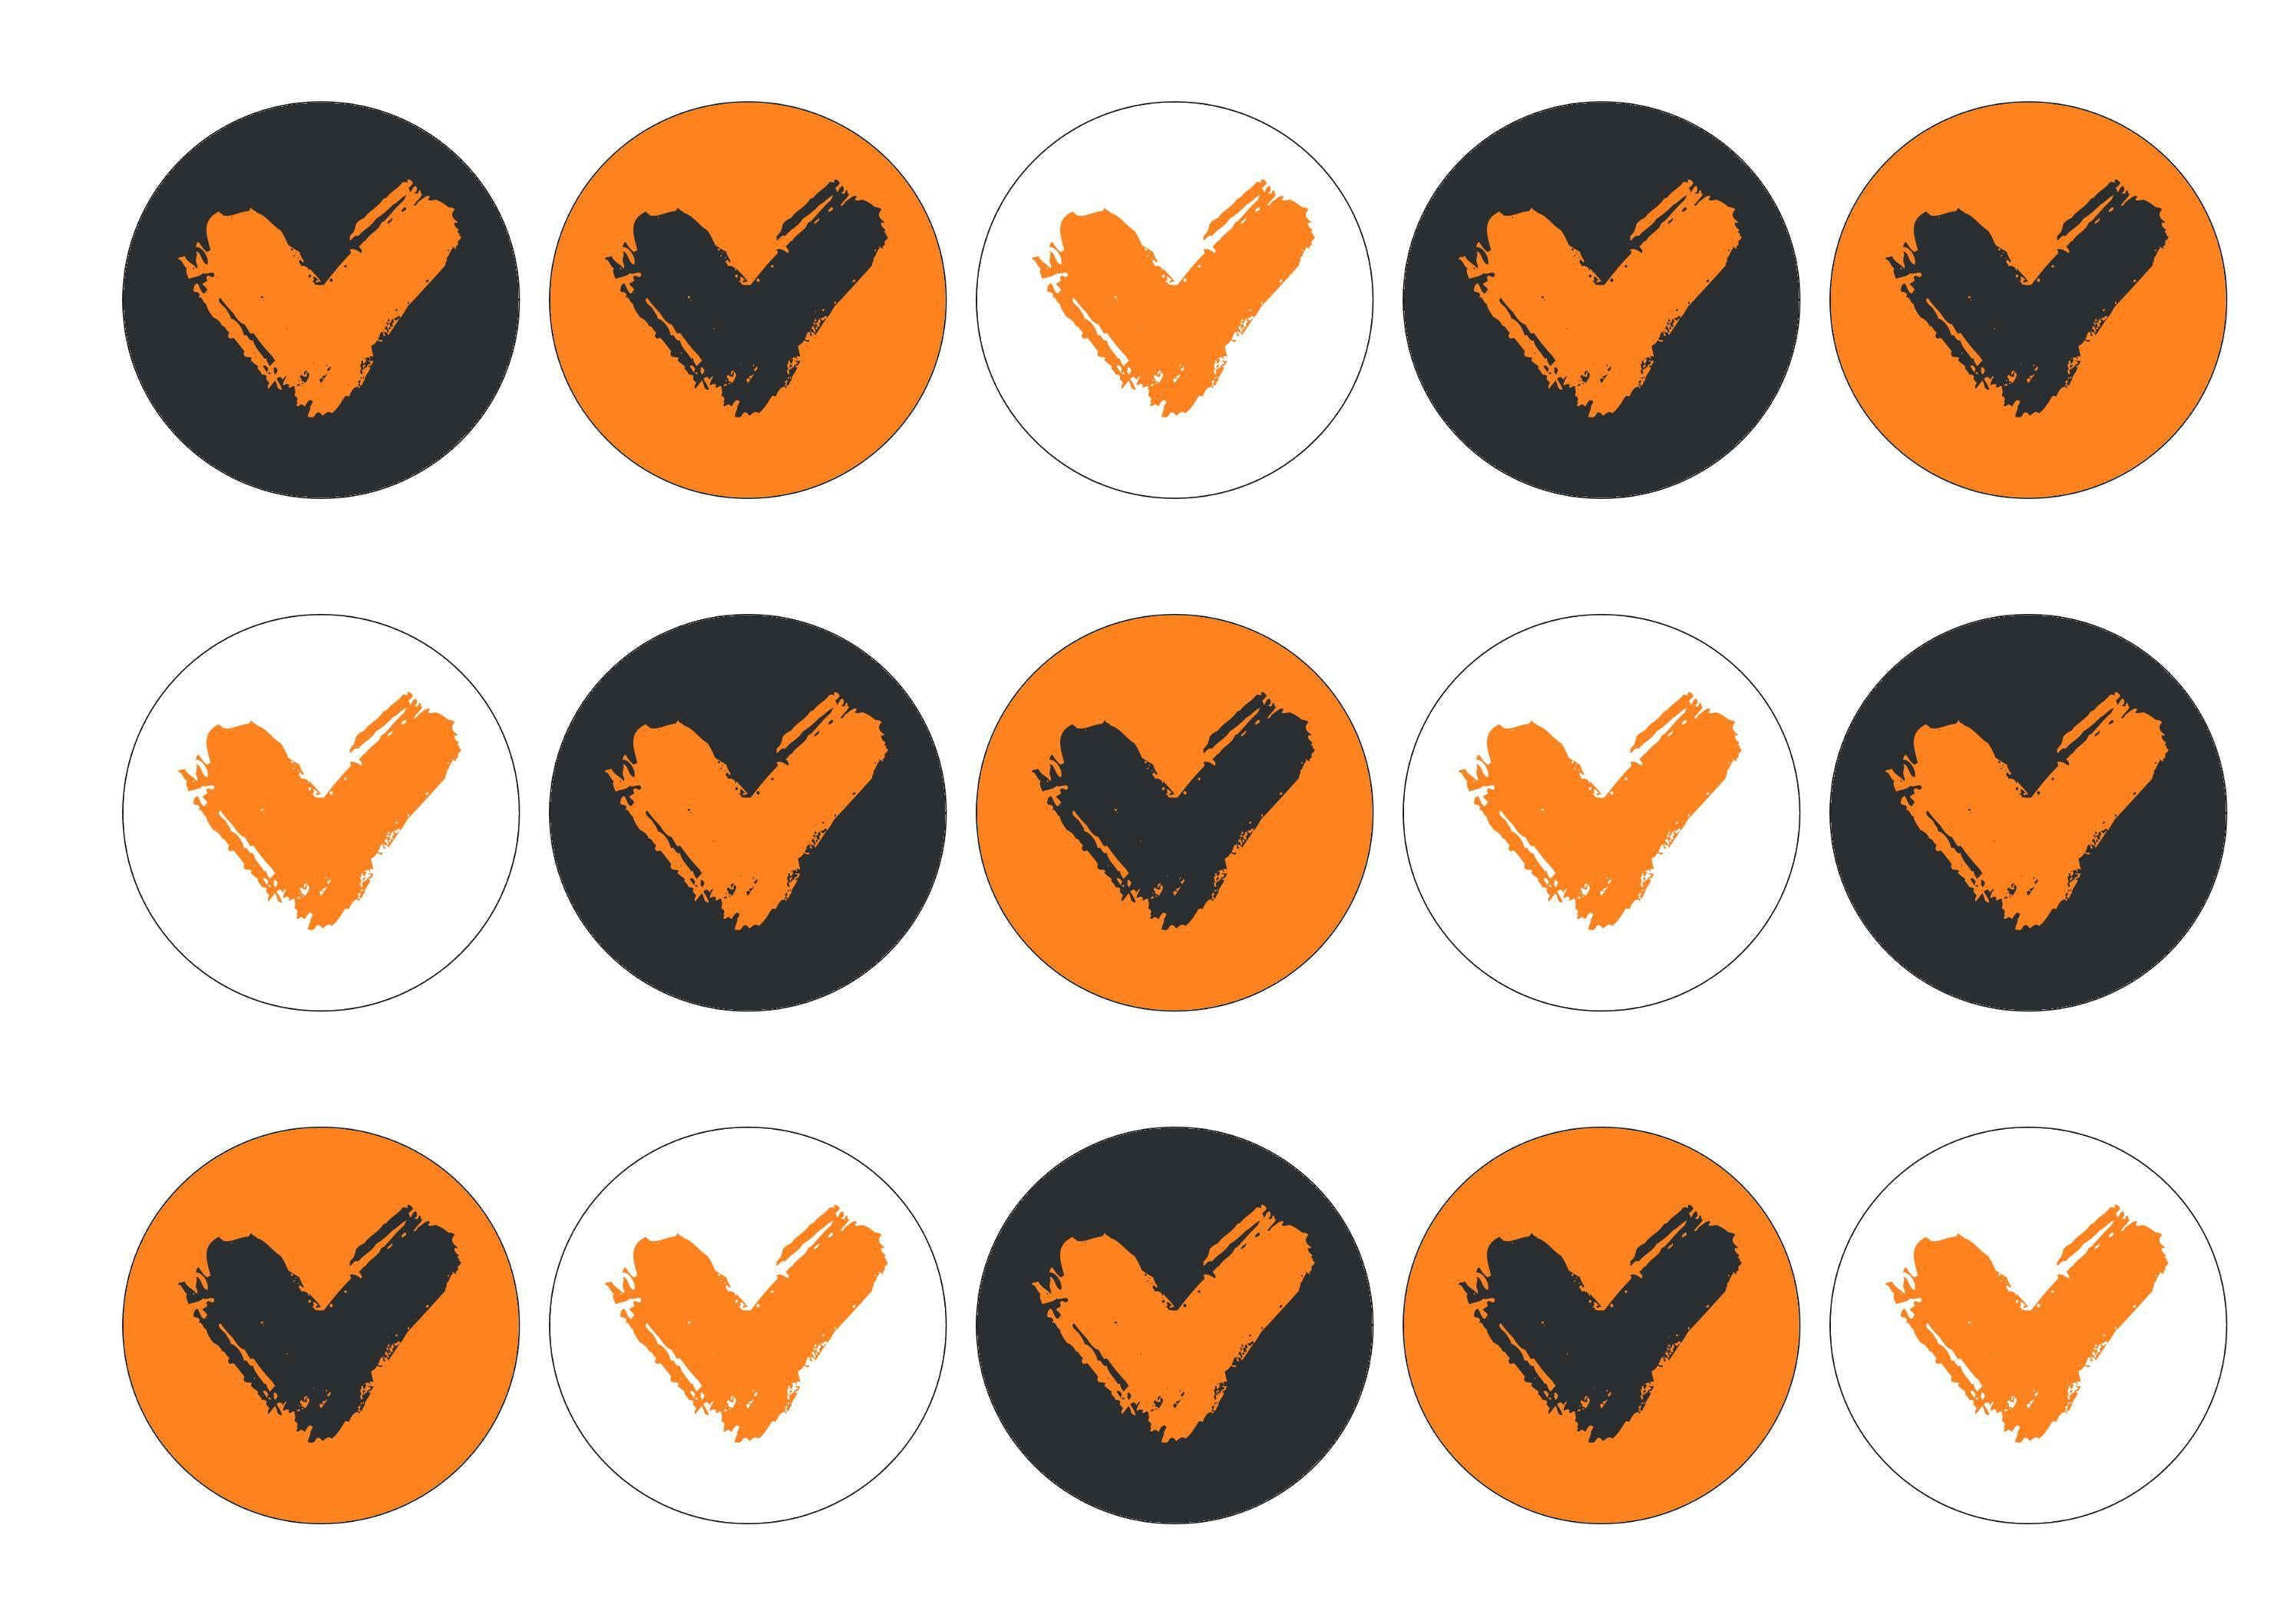 15 printed cupcake toppers with the Veganuary Orange icon